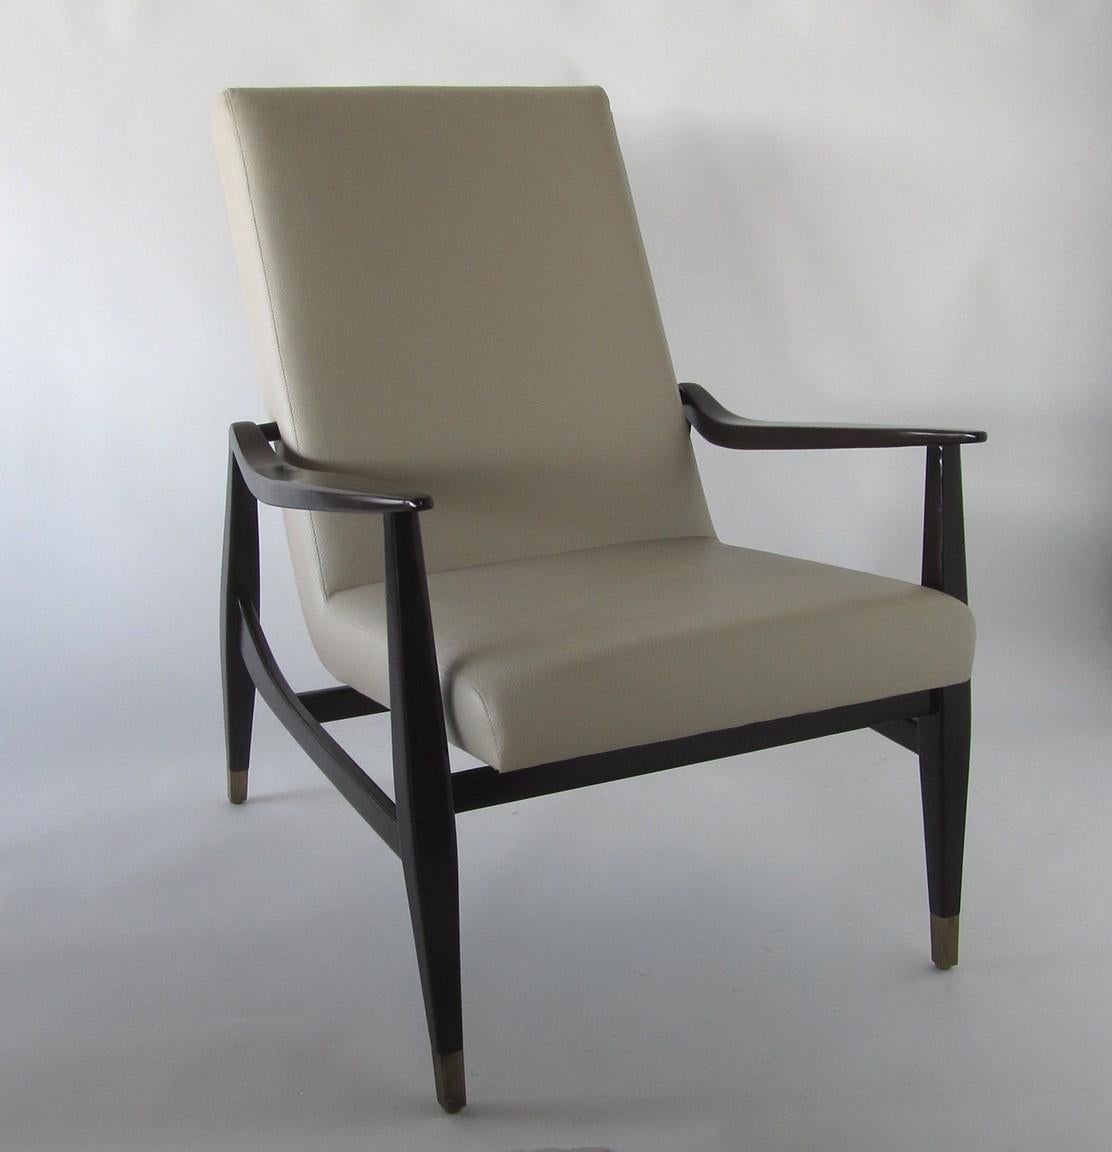 The frame with high back and flared arms and legs, joined by a stretcher. The legs terminating in brass sabots. Two sets available. 4 chairs available.